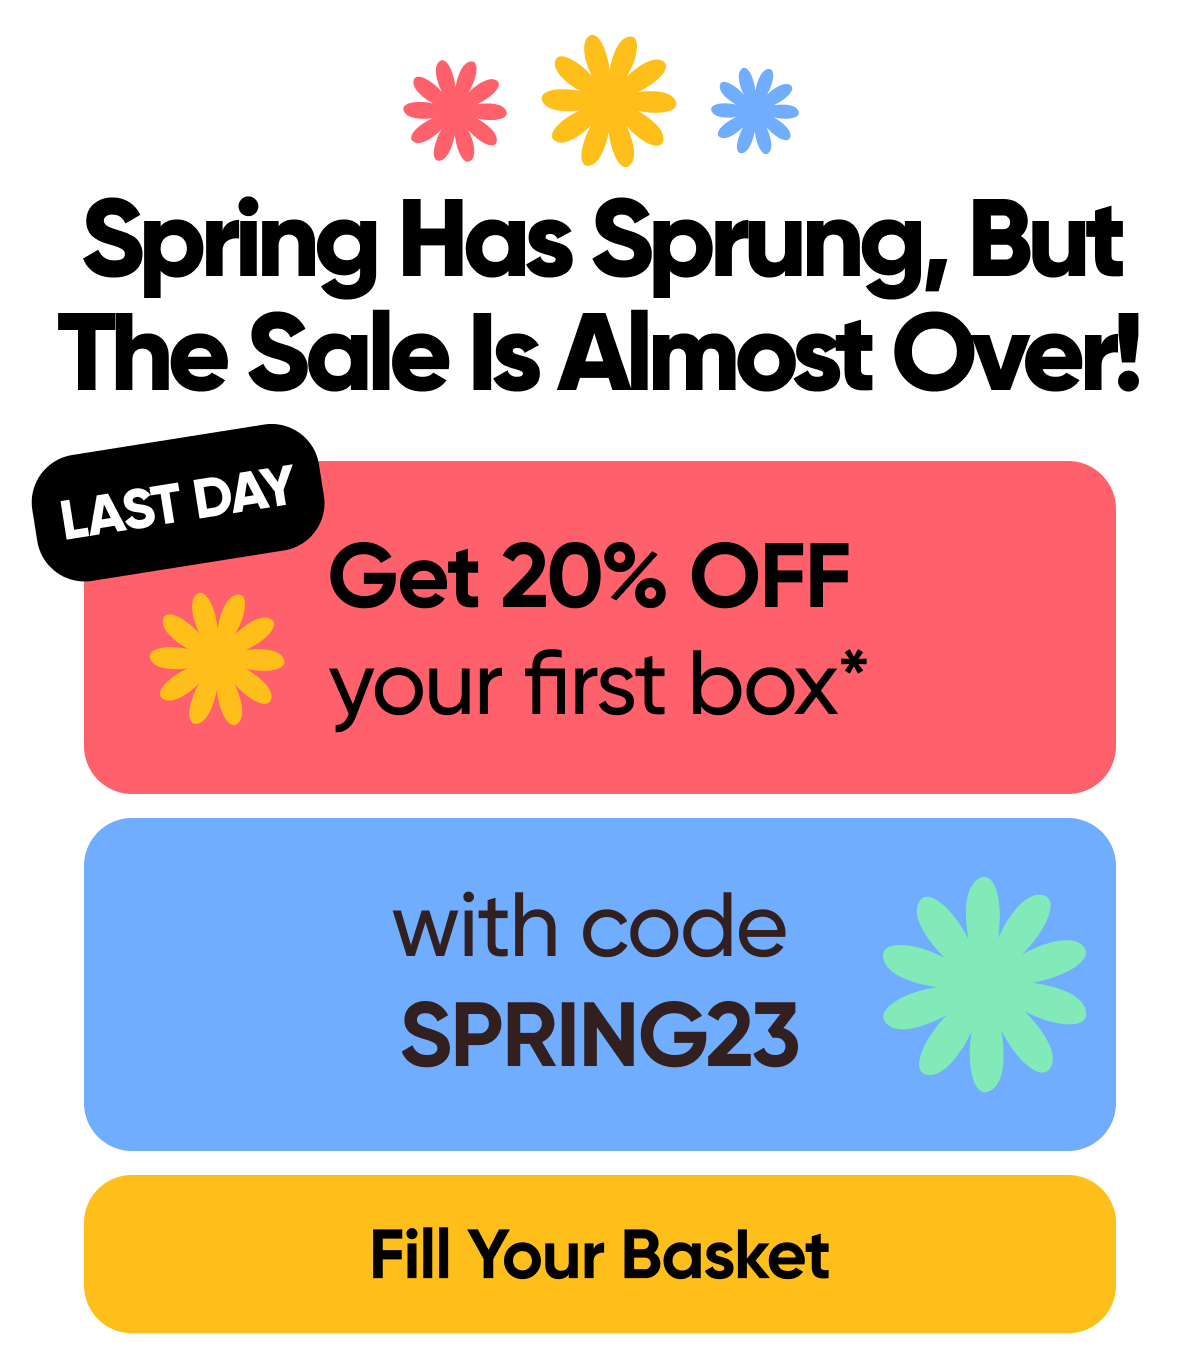 Spring Has Sprung, But The Sale Is Almost Over!   Last Day For 20% OFF the first box* with code: SPRING23  Fill Your Basket